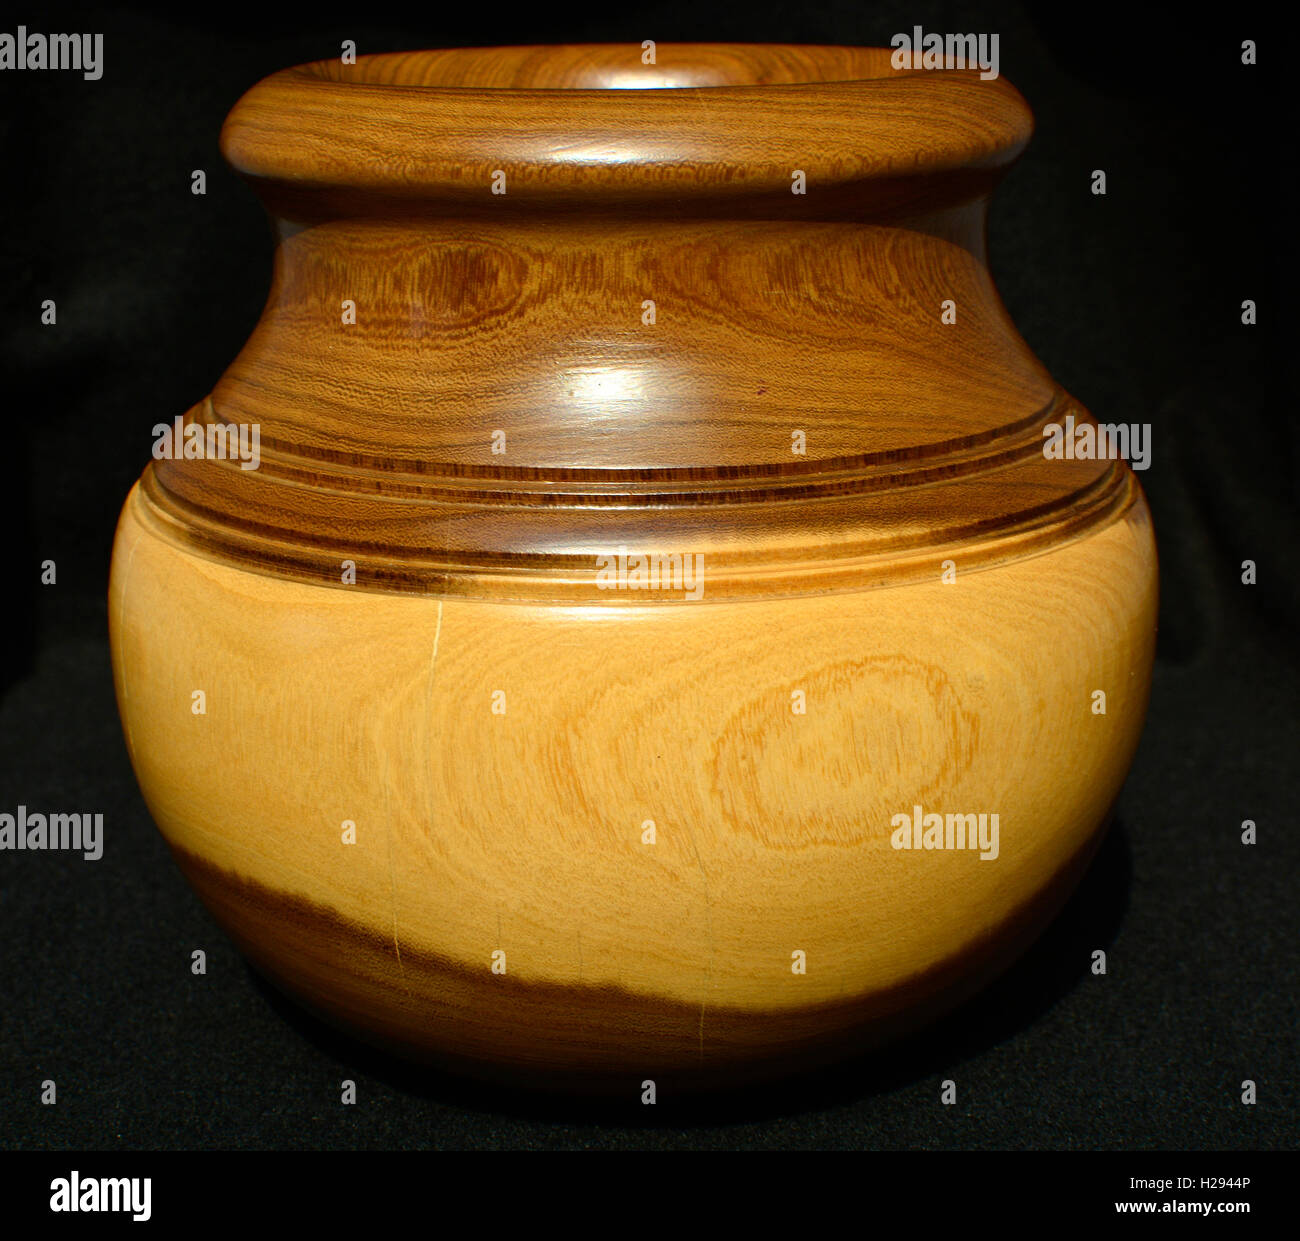 Wooden pot for interior decoration. Beautiful hand crafted wooden pot. Stock Photo